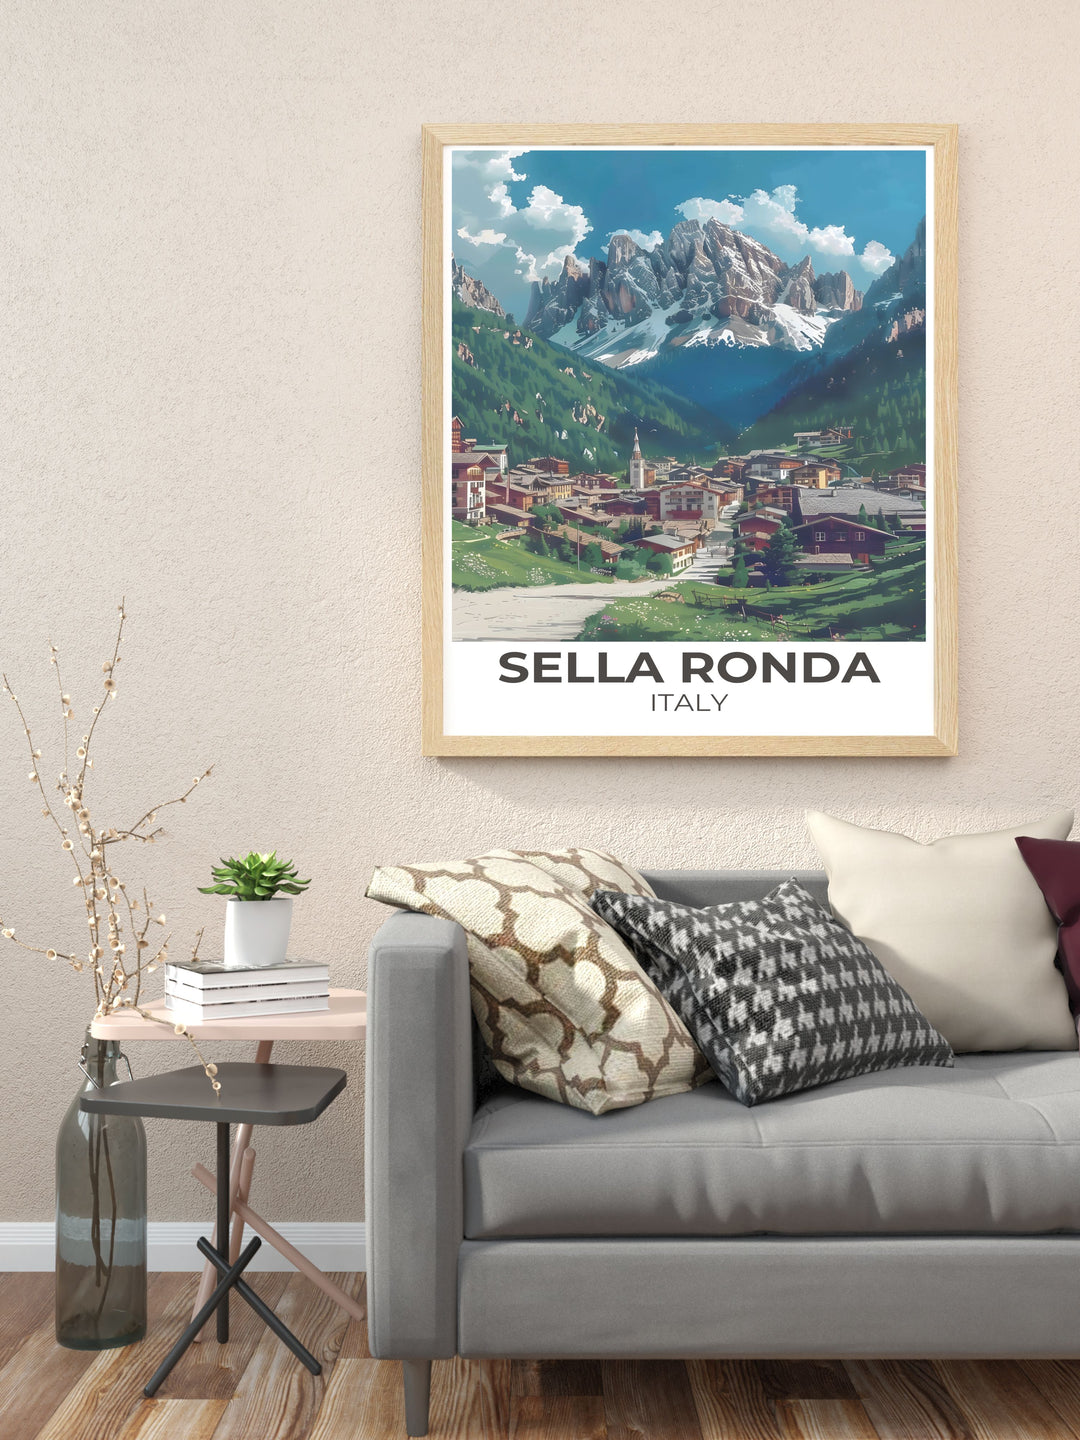 Italy Canvas Art capturing the captivating landscapes and vibrant culture of Sella Ronda, ideal for bringing the spirit of the Italian Alps into your home.